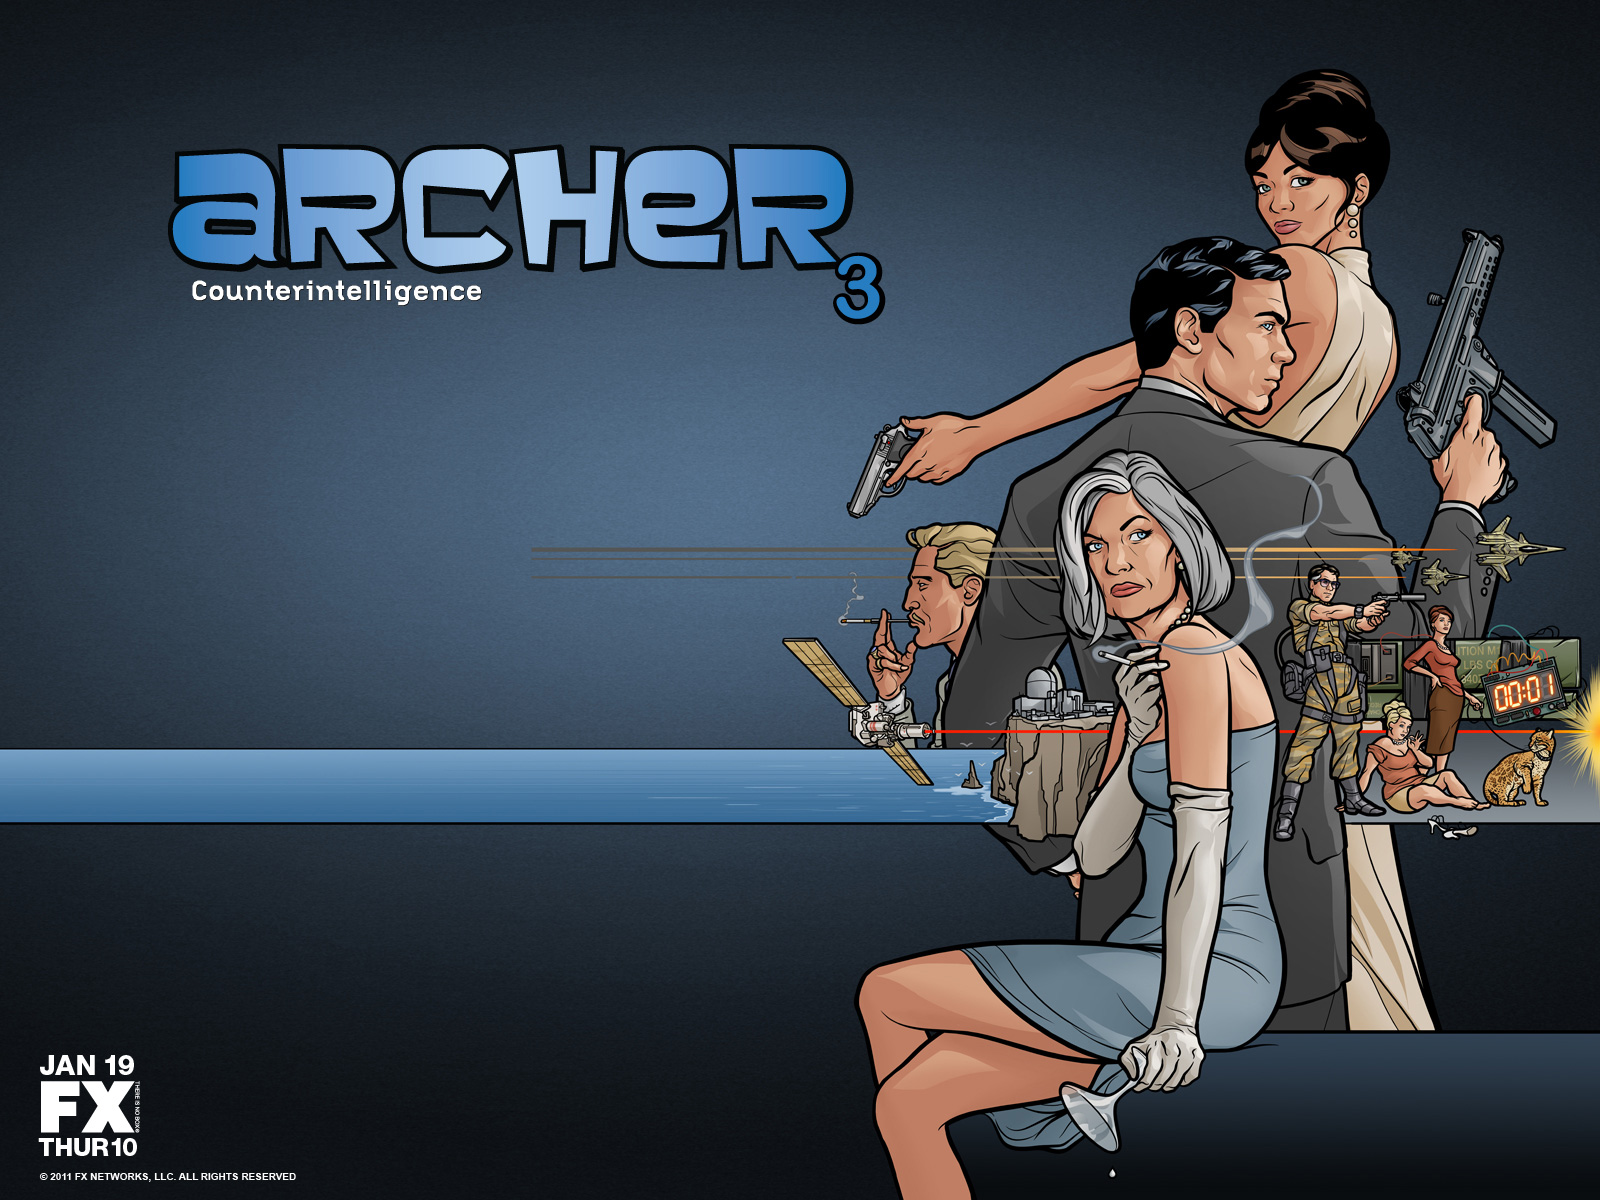 WALLPAPER WEDNESDAY Lets Spice Up Hump Day With Some More ARCHER